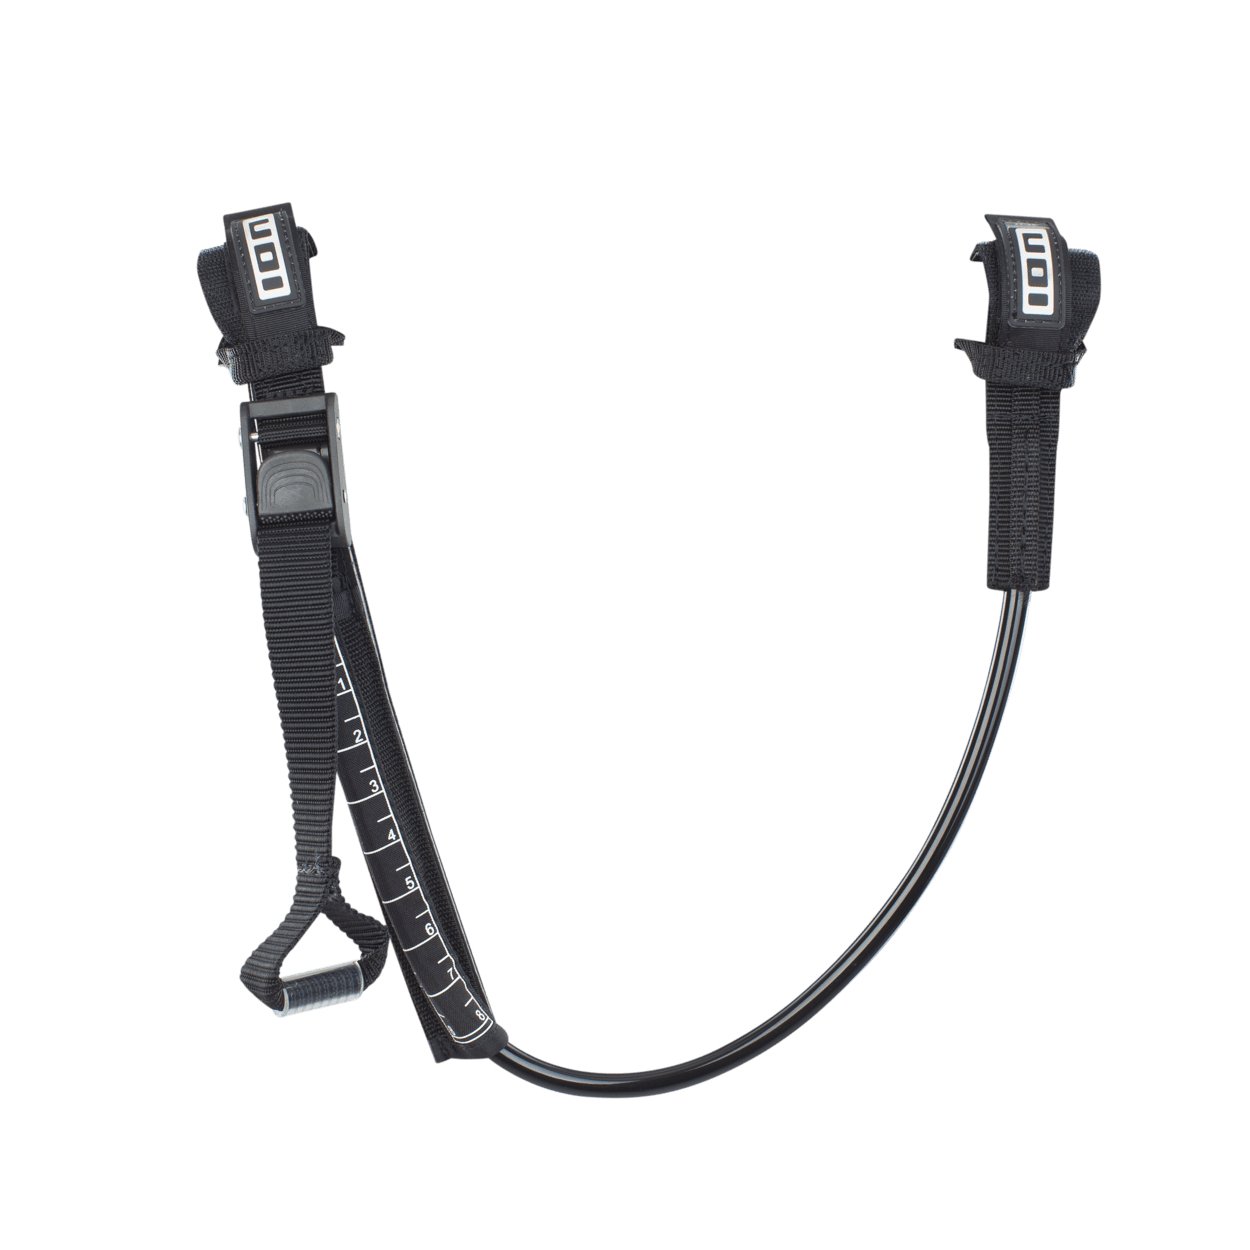 ION Windsurf Harness Line Vario 2022 - Worthing Watersports - 9008415960811 - Accessories - ION Water